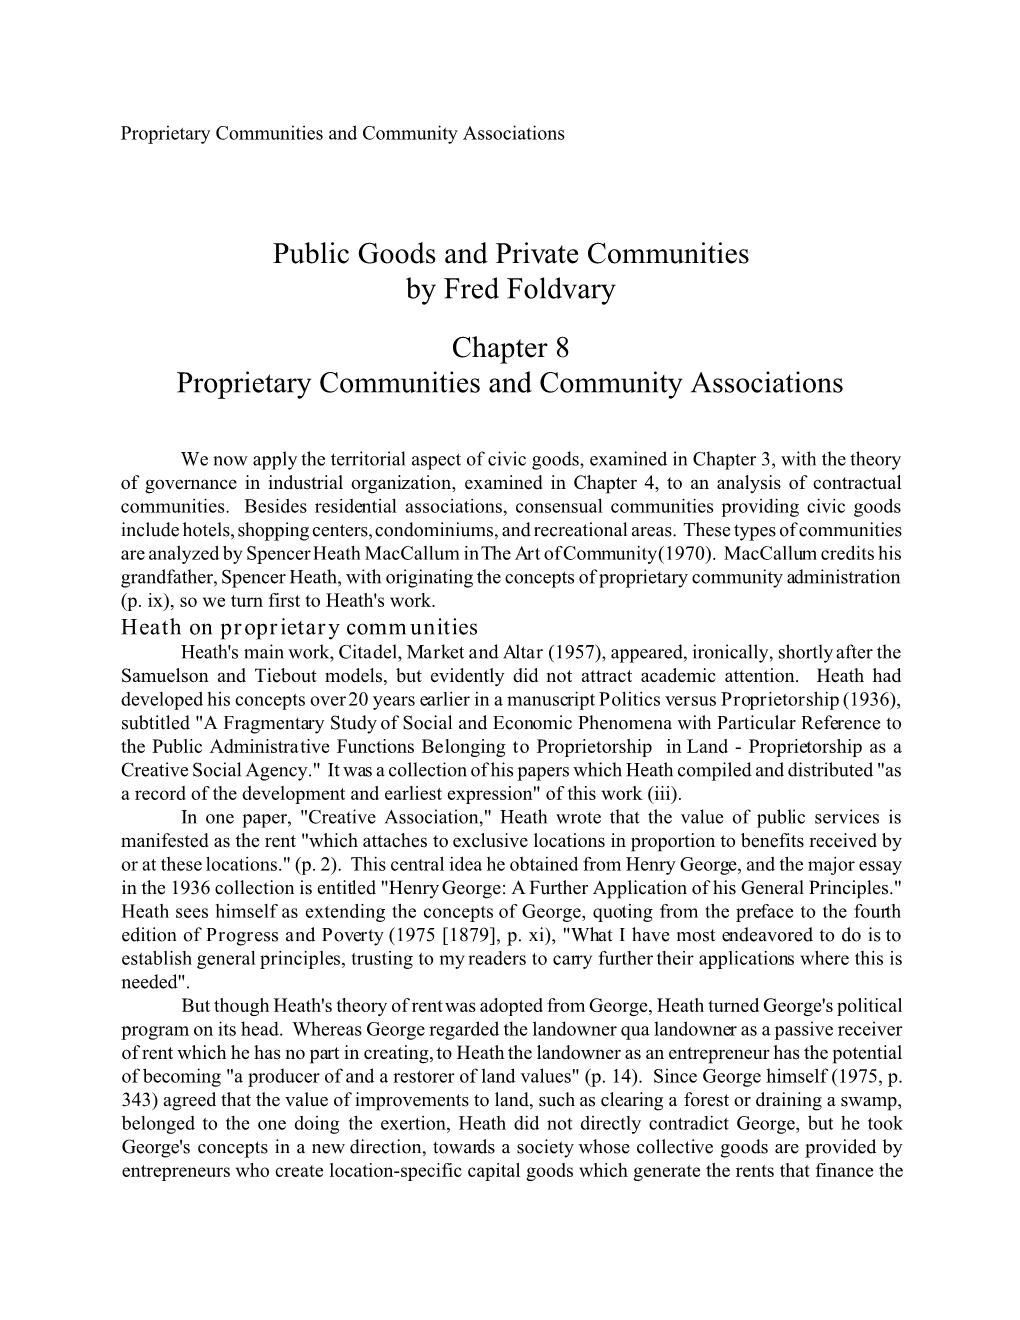 Public Goods and Private Communities by Fred Foldvary Chapter 8 Proprietary Communities and Community Associations